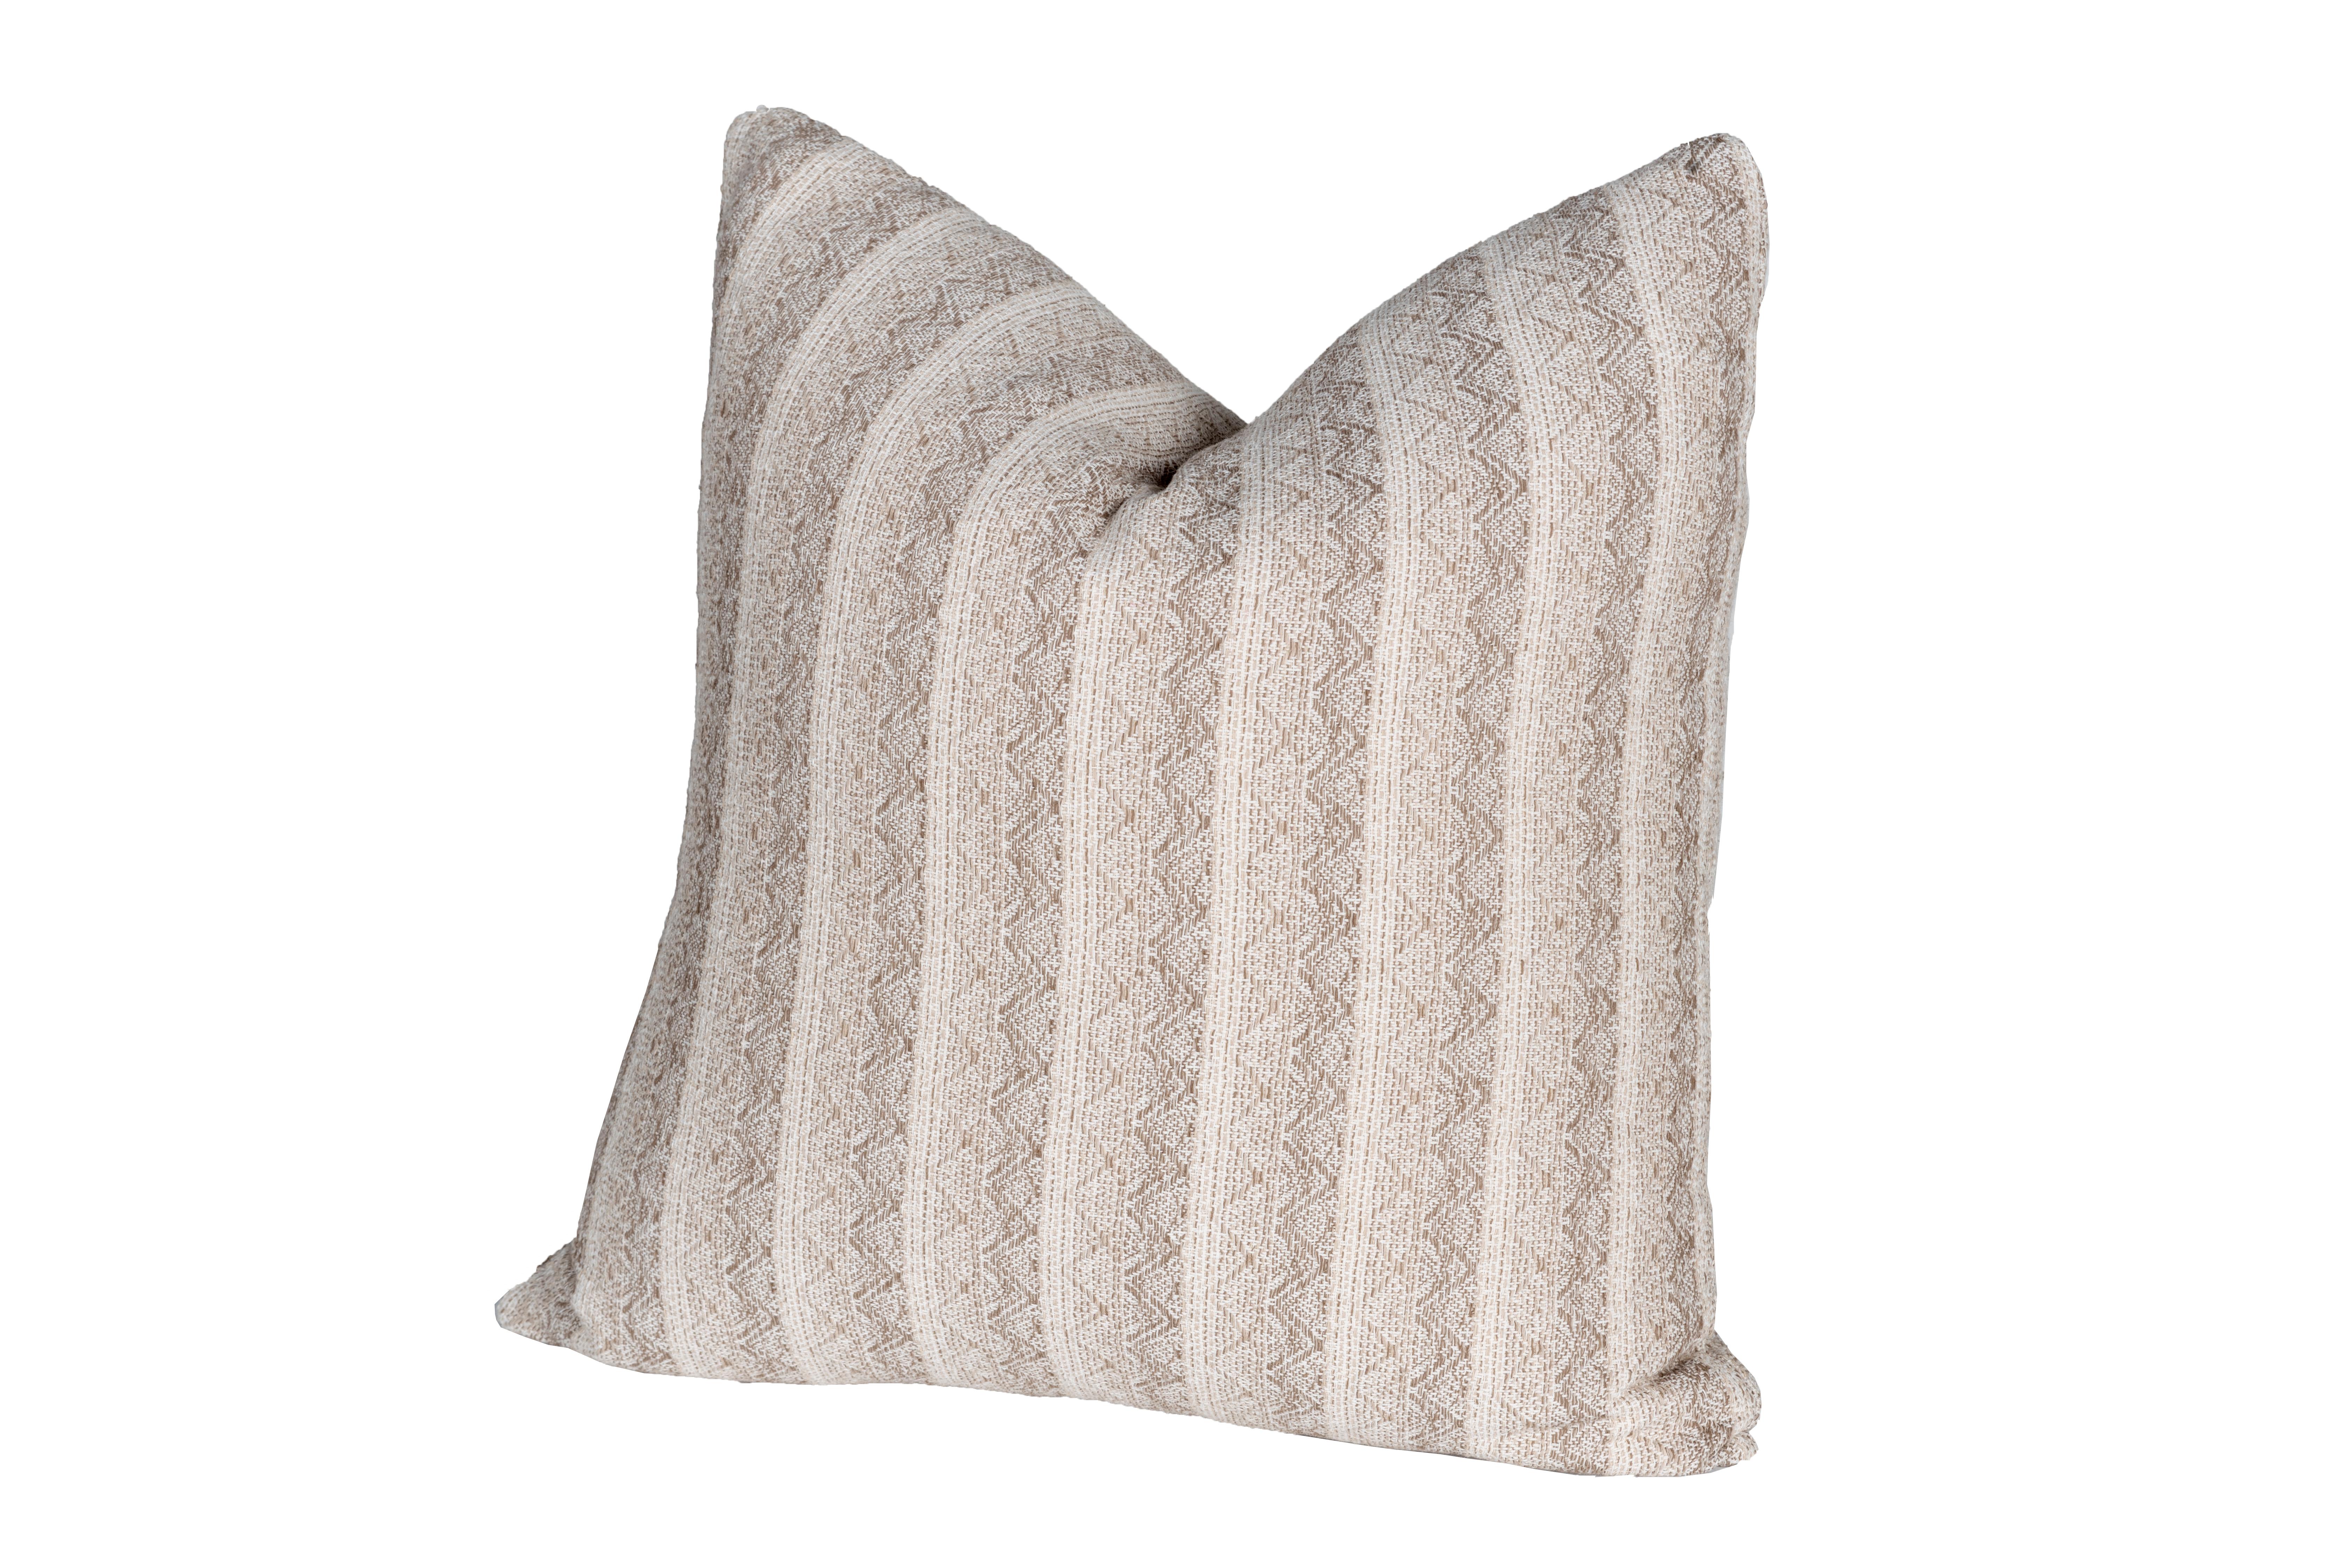 The White and Gray Vintage Hmong Striped Textile Down Filled Pillow is the perfect addition to any room. Its muted natural colors are a great match for almost any decor, and it adds texture and interest with its soft linen textile texture. This down